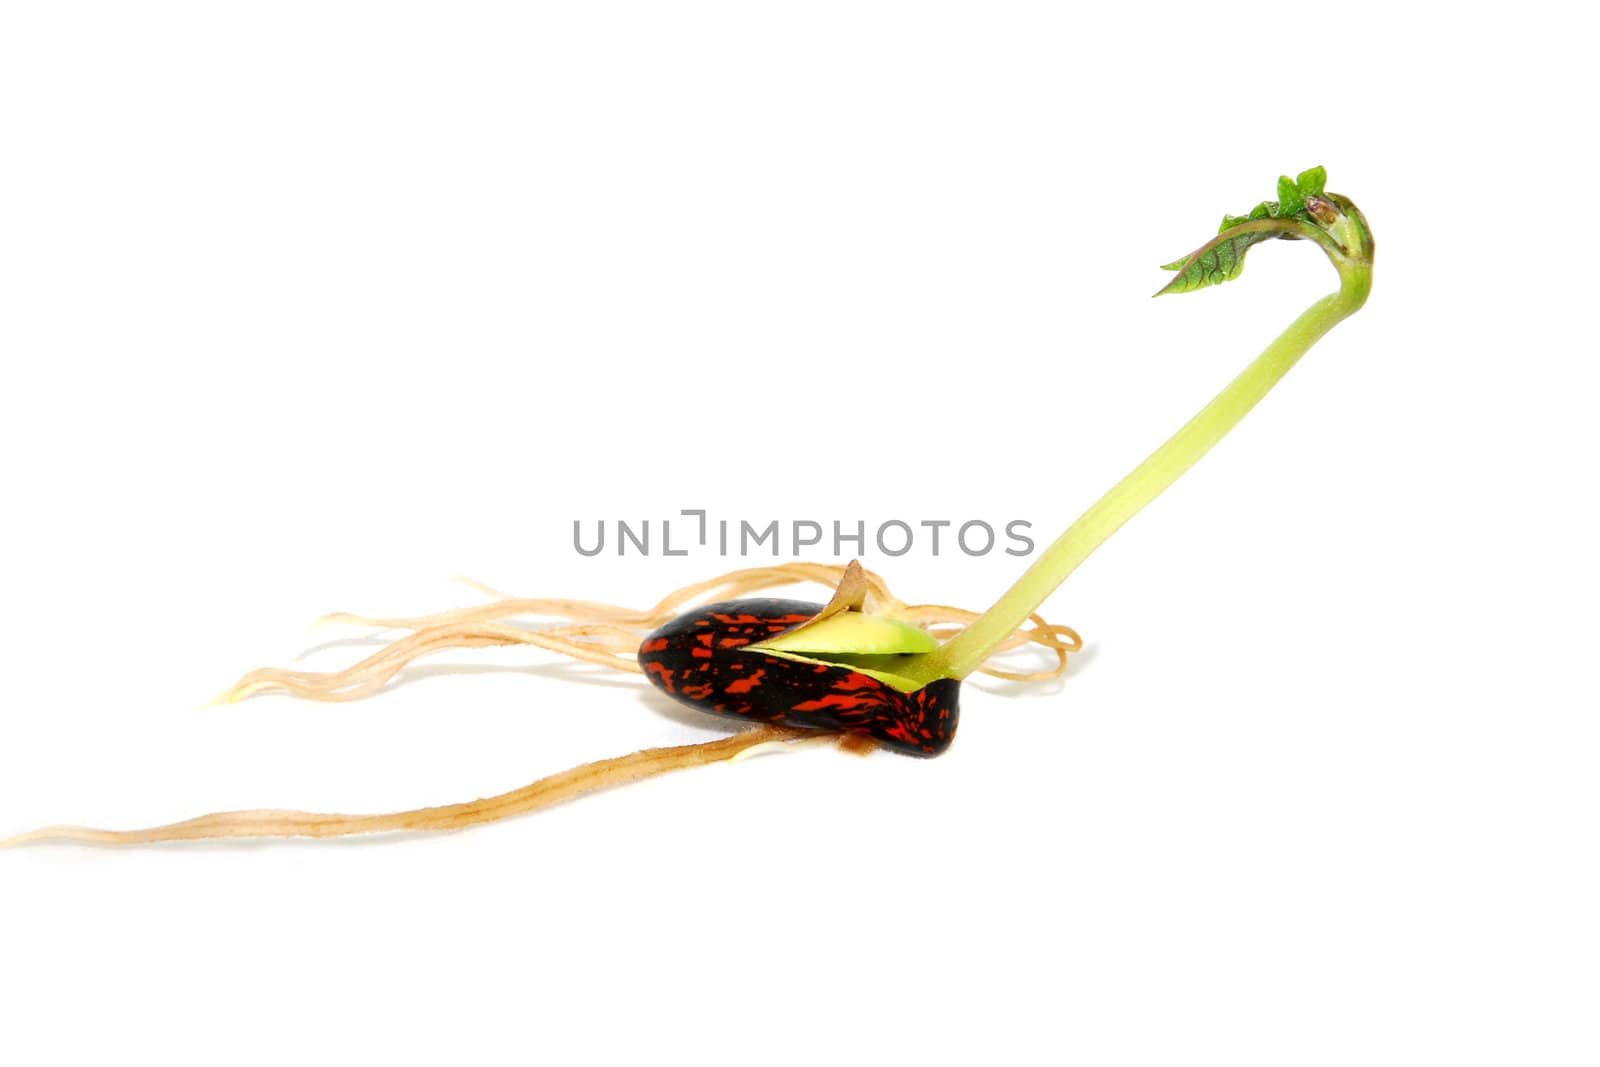 Runner bean seed with a long green leaf shoot, isolated on a white background